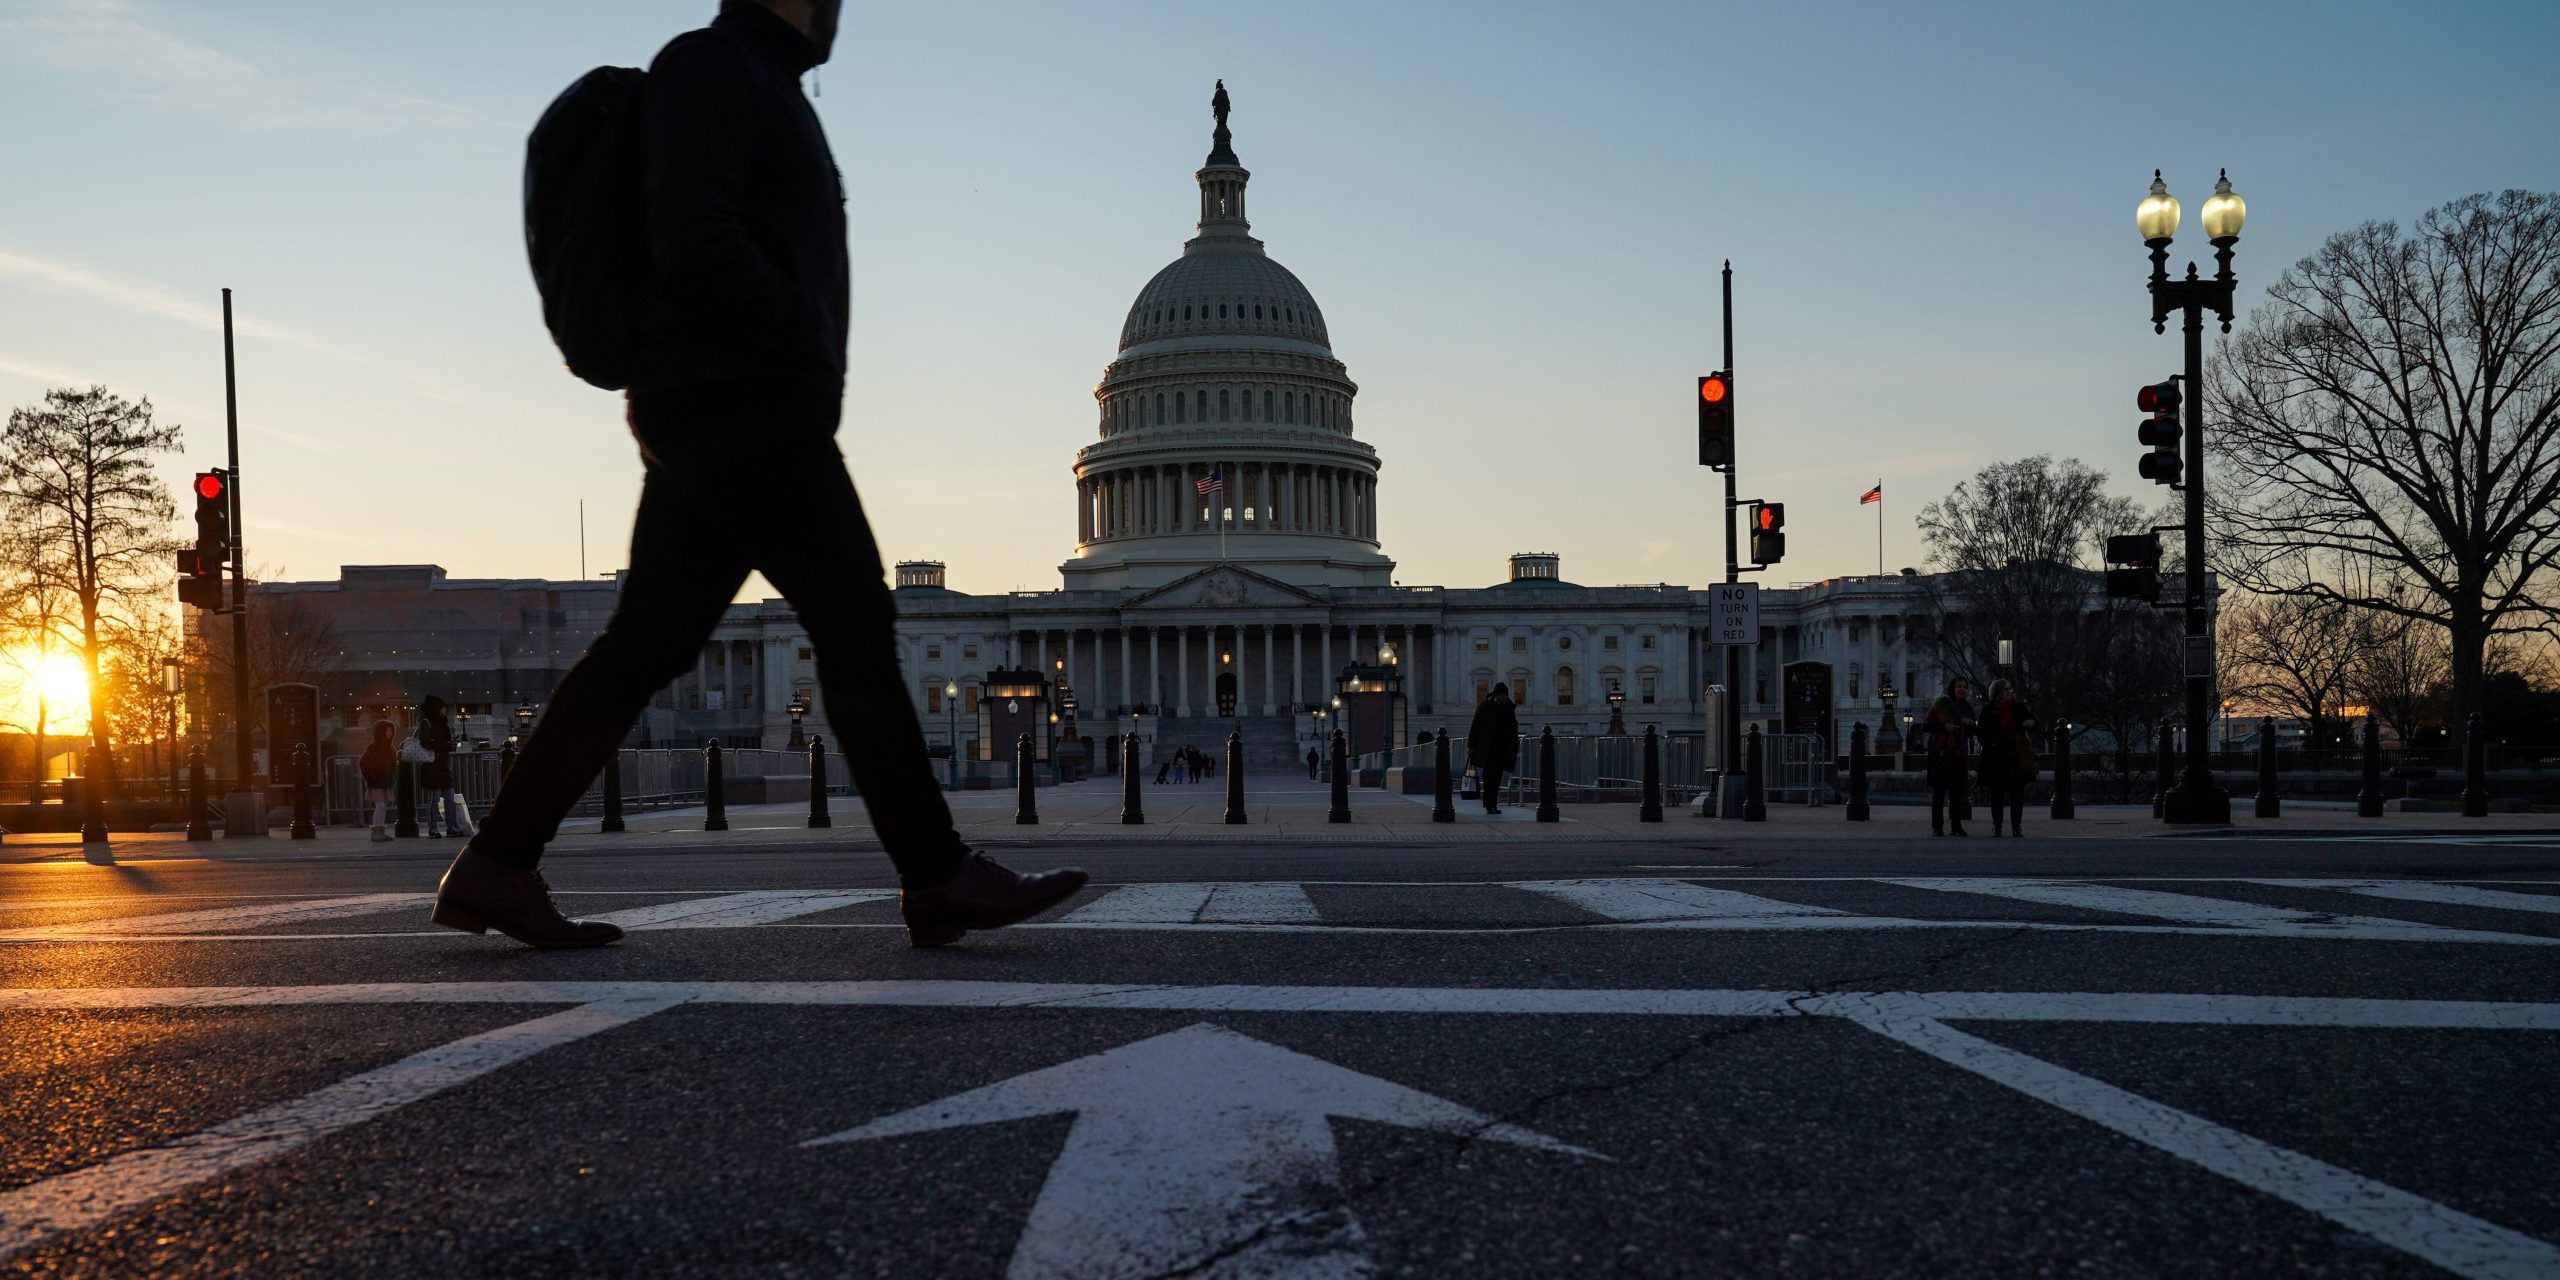 FILE PHOTO: The U.S. Capitol building exterior is seen at sunset as members of the Senate participate in the first day of the impeachment trial of President Donald Trump in Washington, U.S., January 21, 2020. REUTERS/Sarah Silbiger.